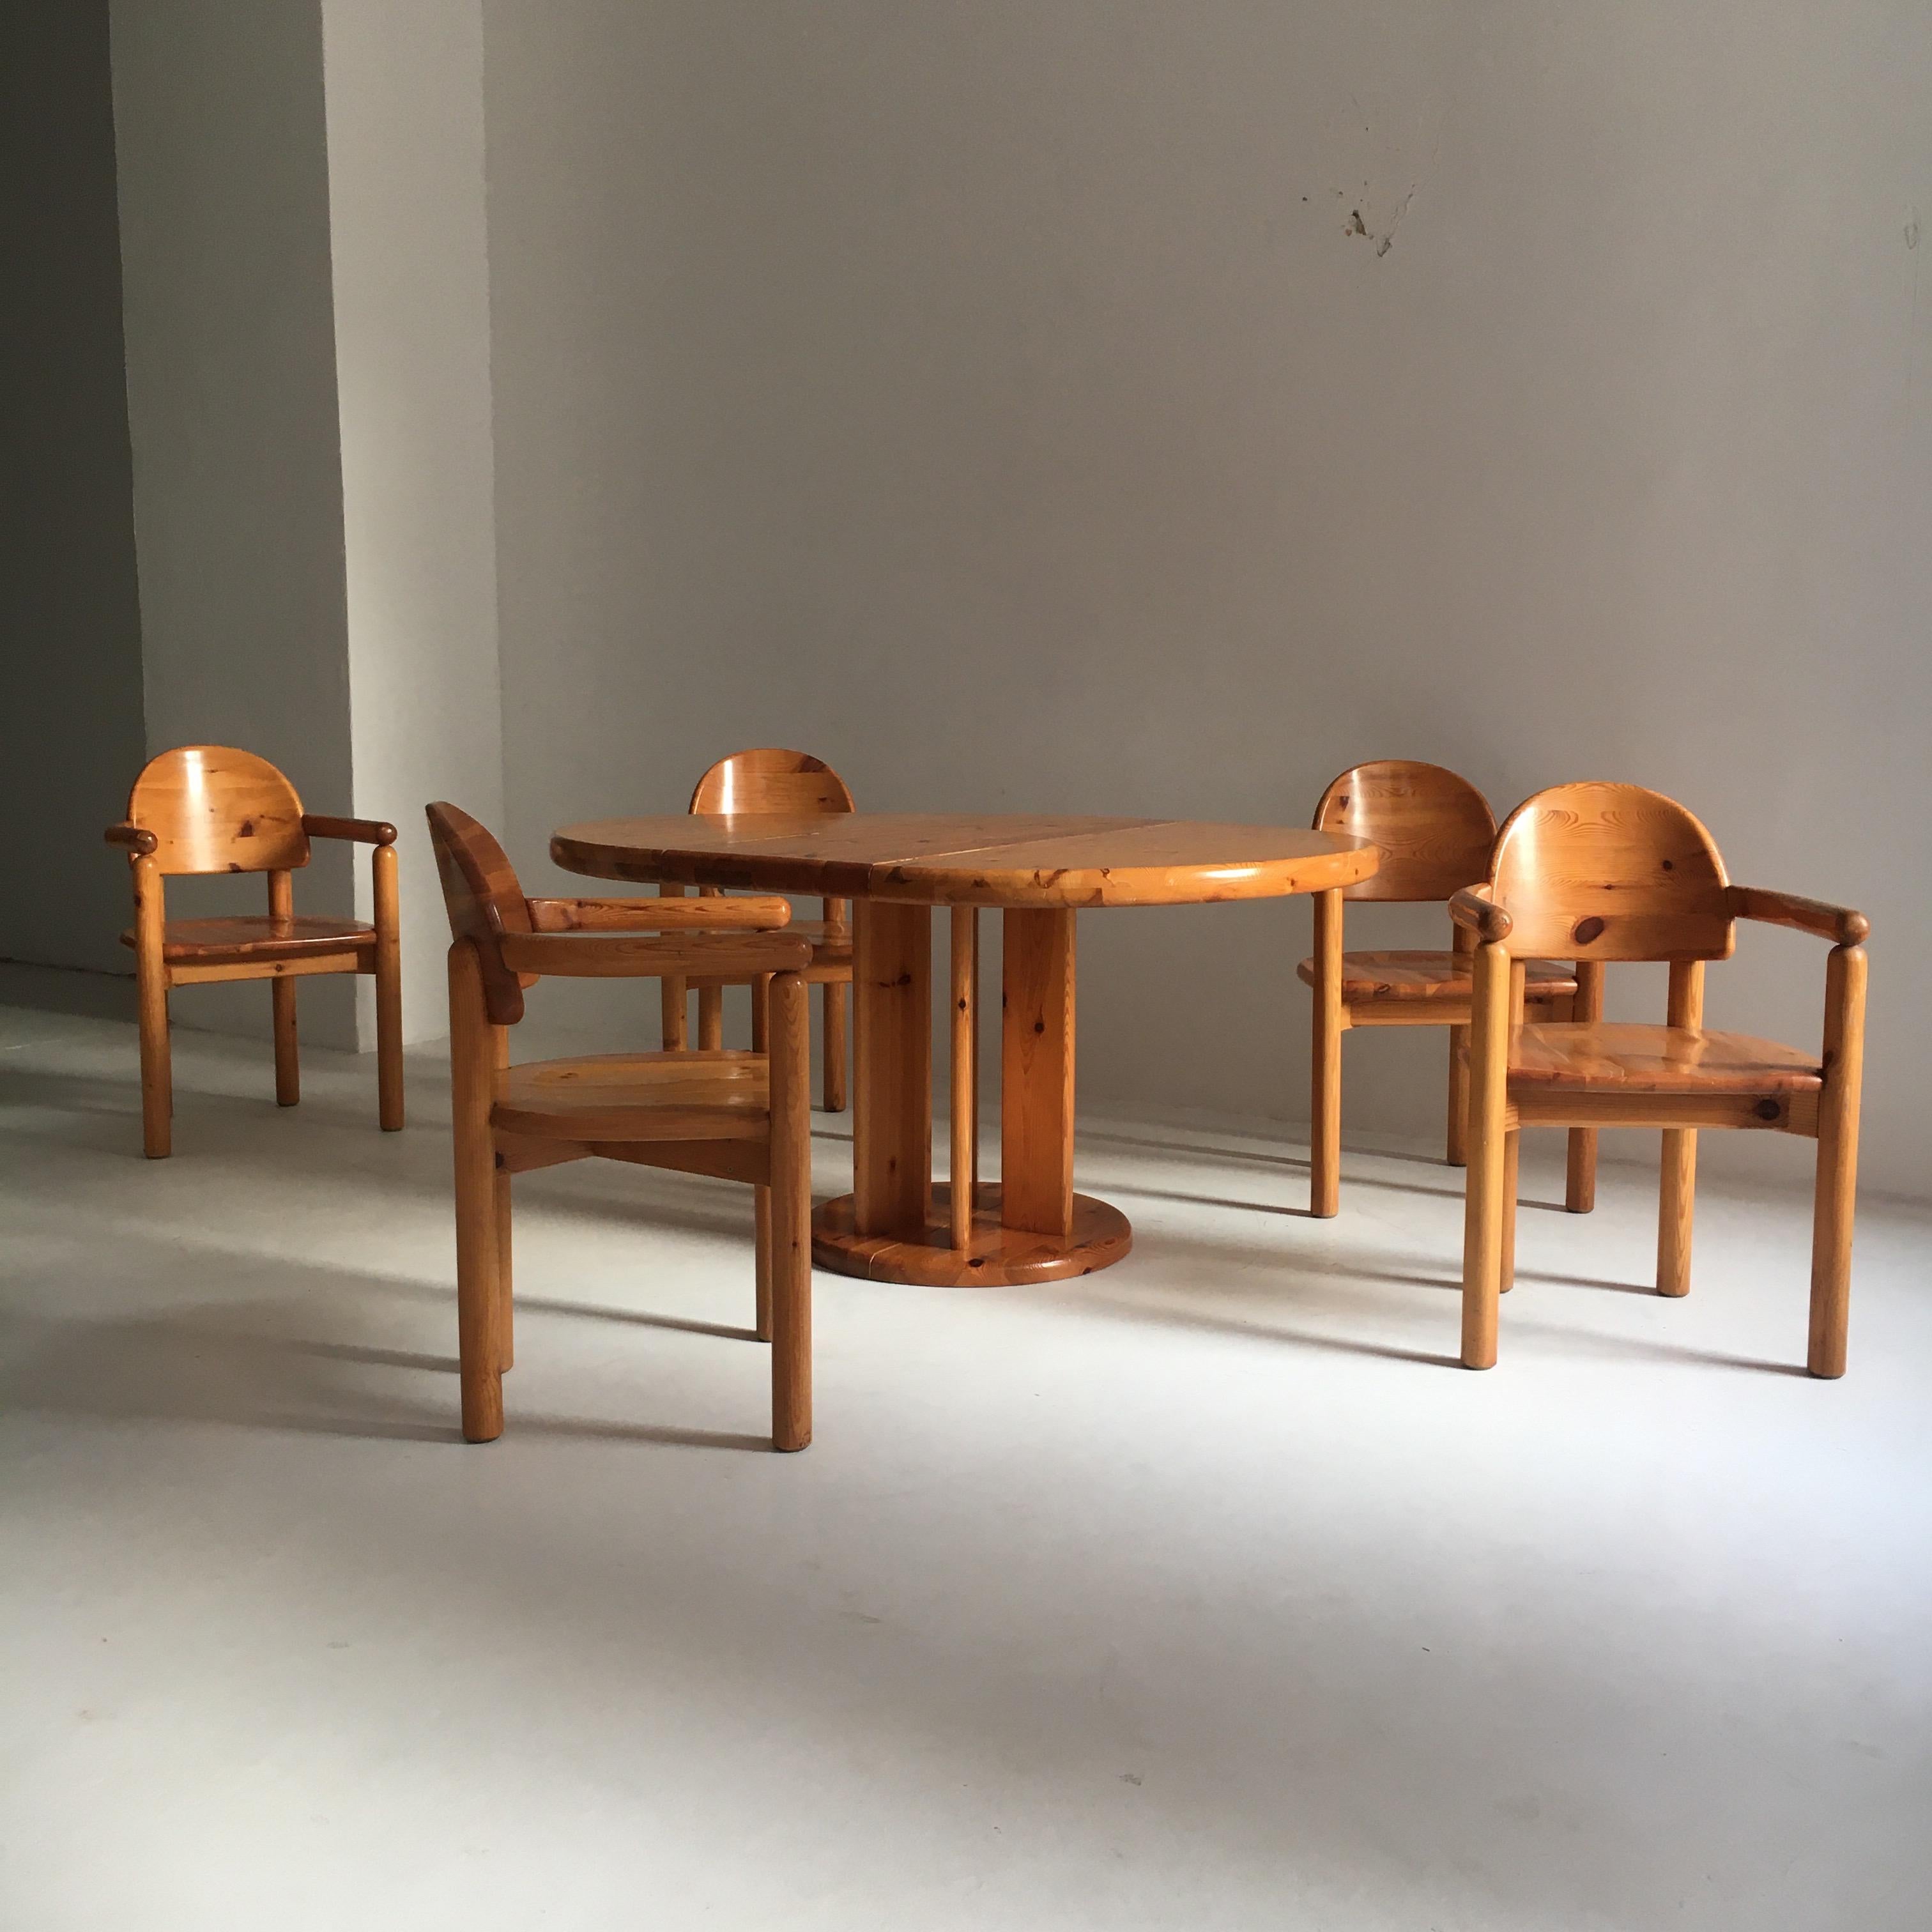 Dining room set pine table five armchairs by Rainer Daumiller, Denmark, 1970.